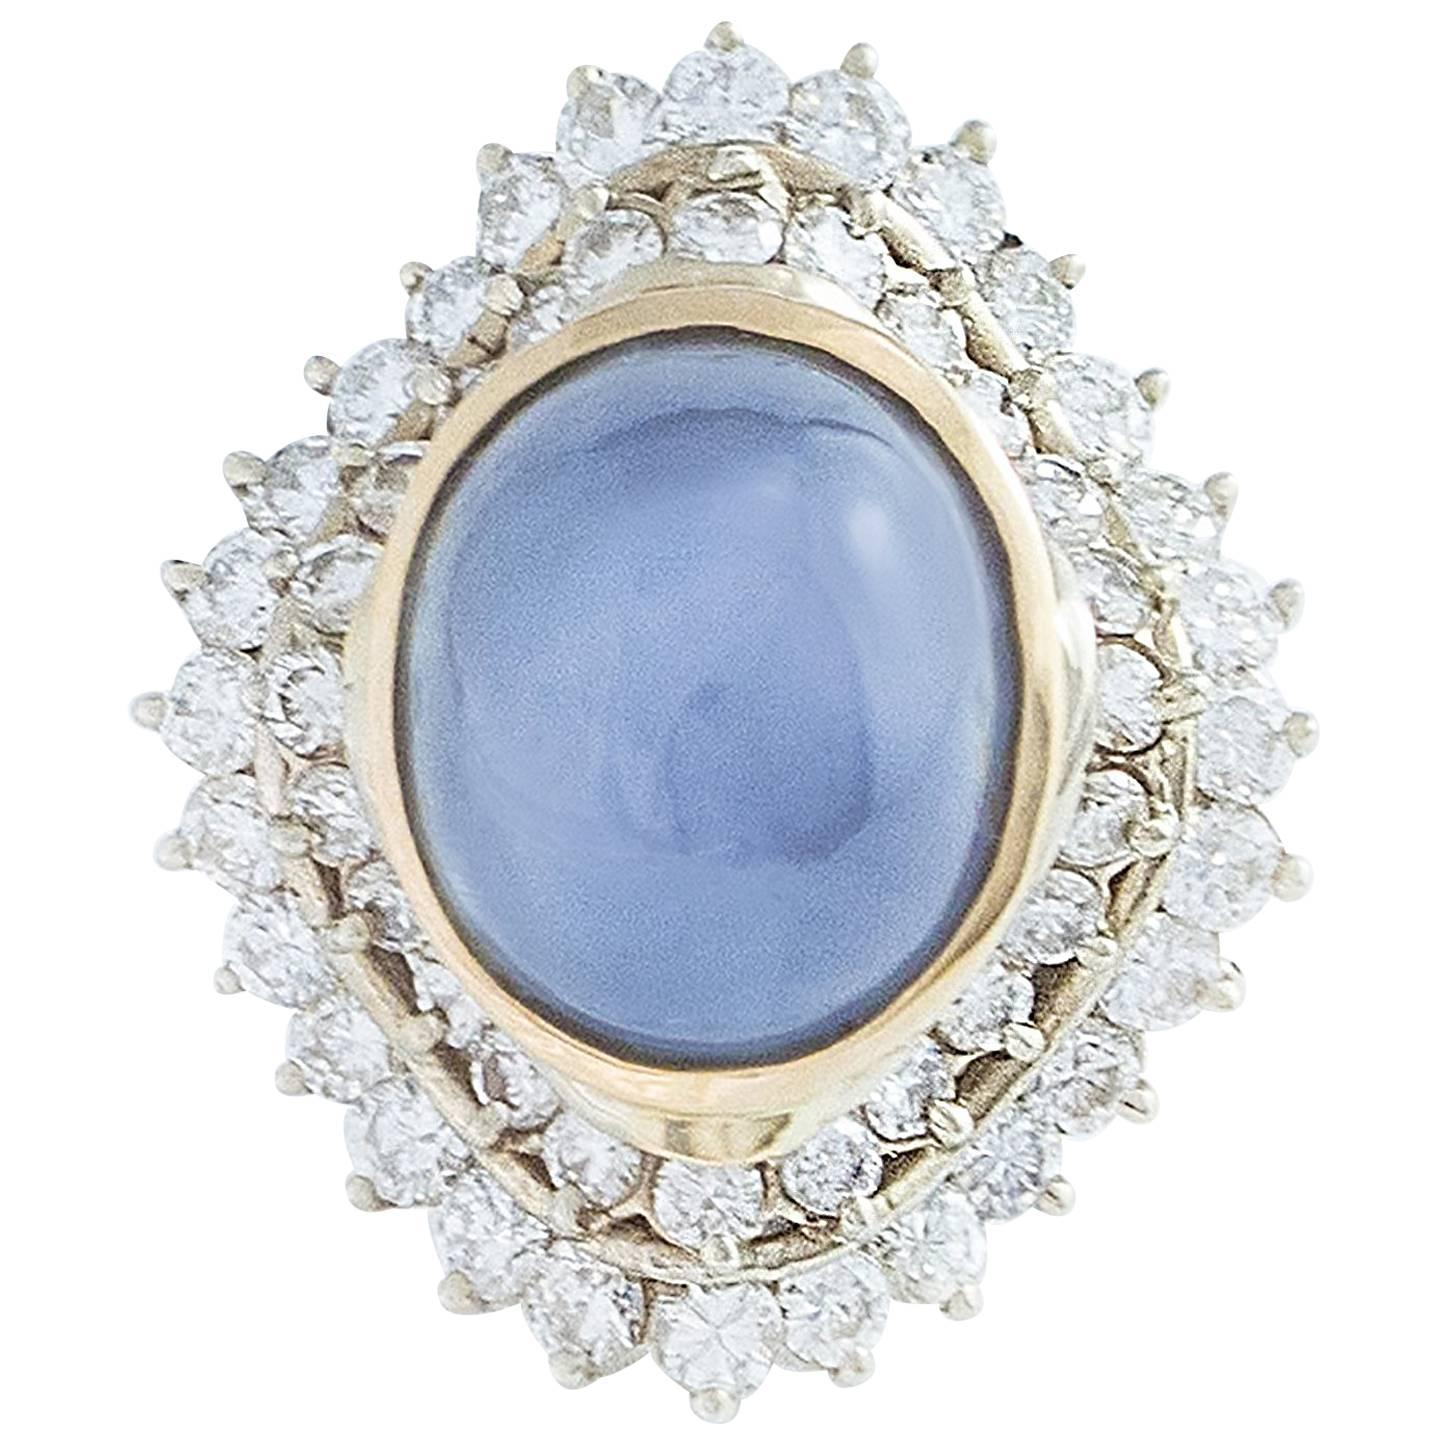 A natural Blue Star Sapphire weighing 14.50 carats is surrounded by 2 rows of G-H full cut White Diamonds totalling 1.90 carats in this elegant Ballerina style 18K White and Yellow Gold ring.  

Large and impressive, the head measures 26mm north